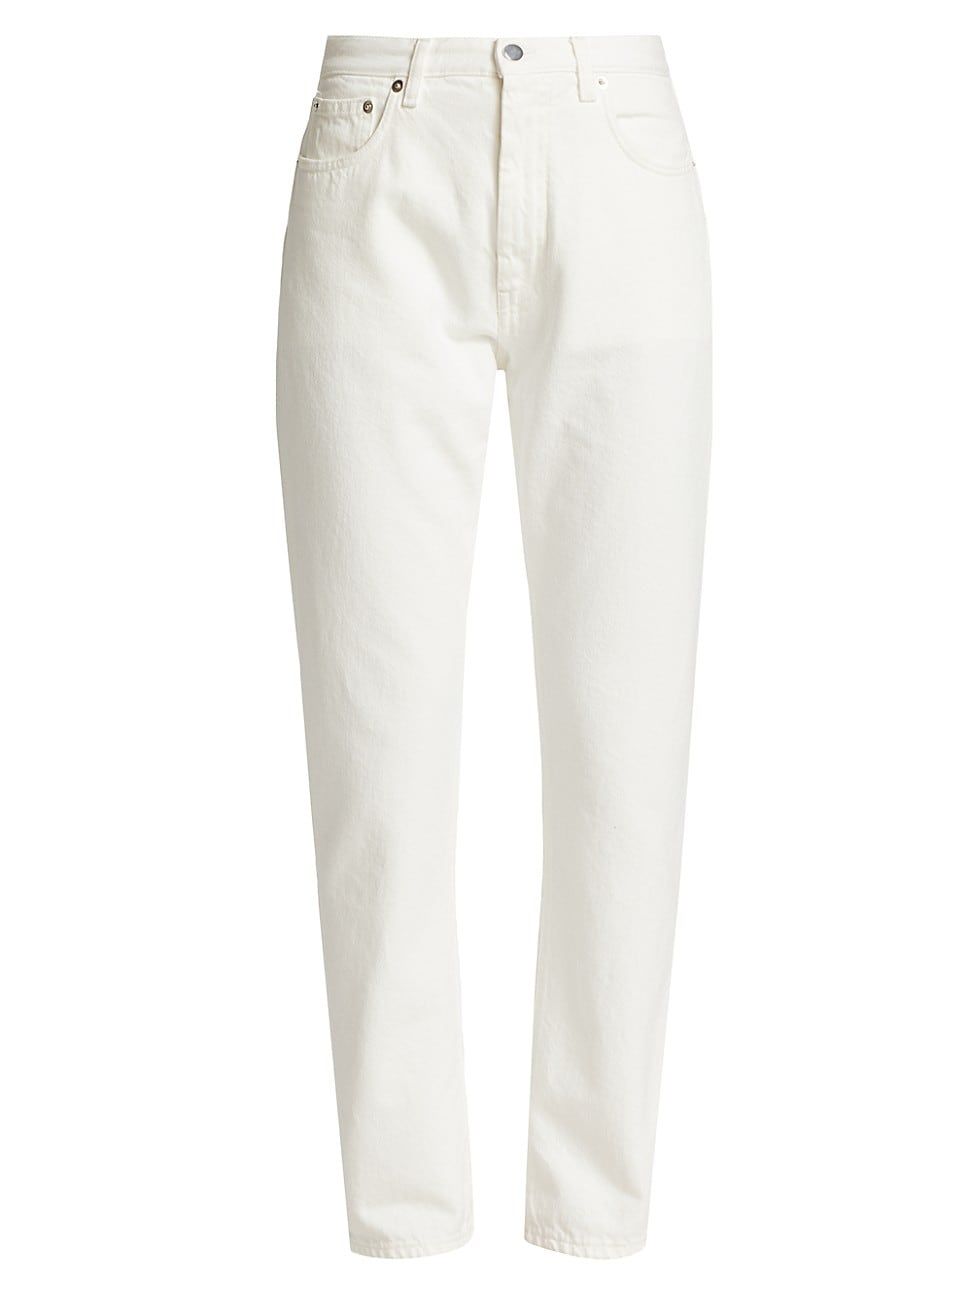 White Jeans - Buy White Jeans Online Starting at Just ₹343 | Meesho